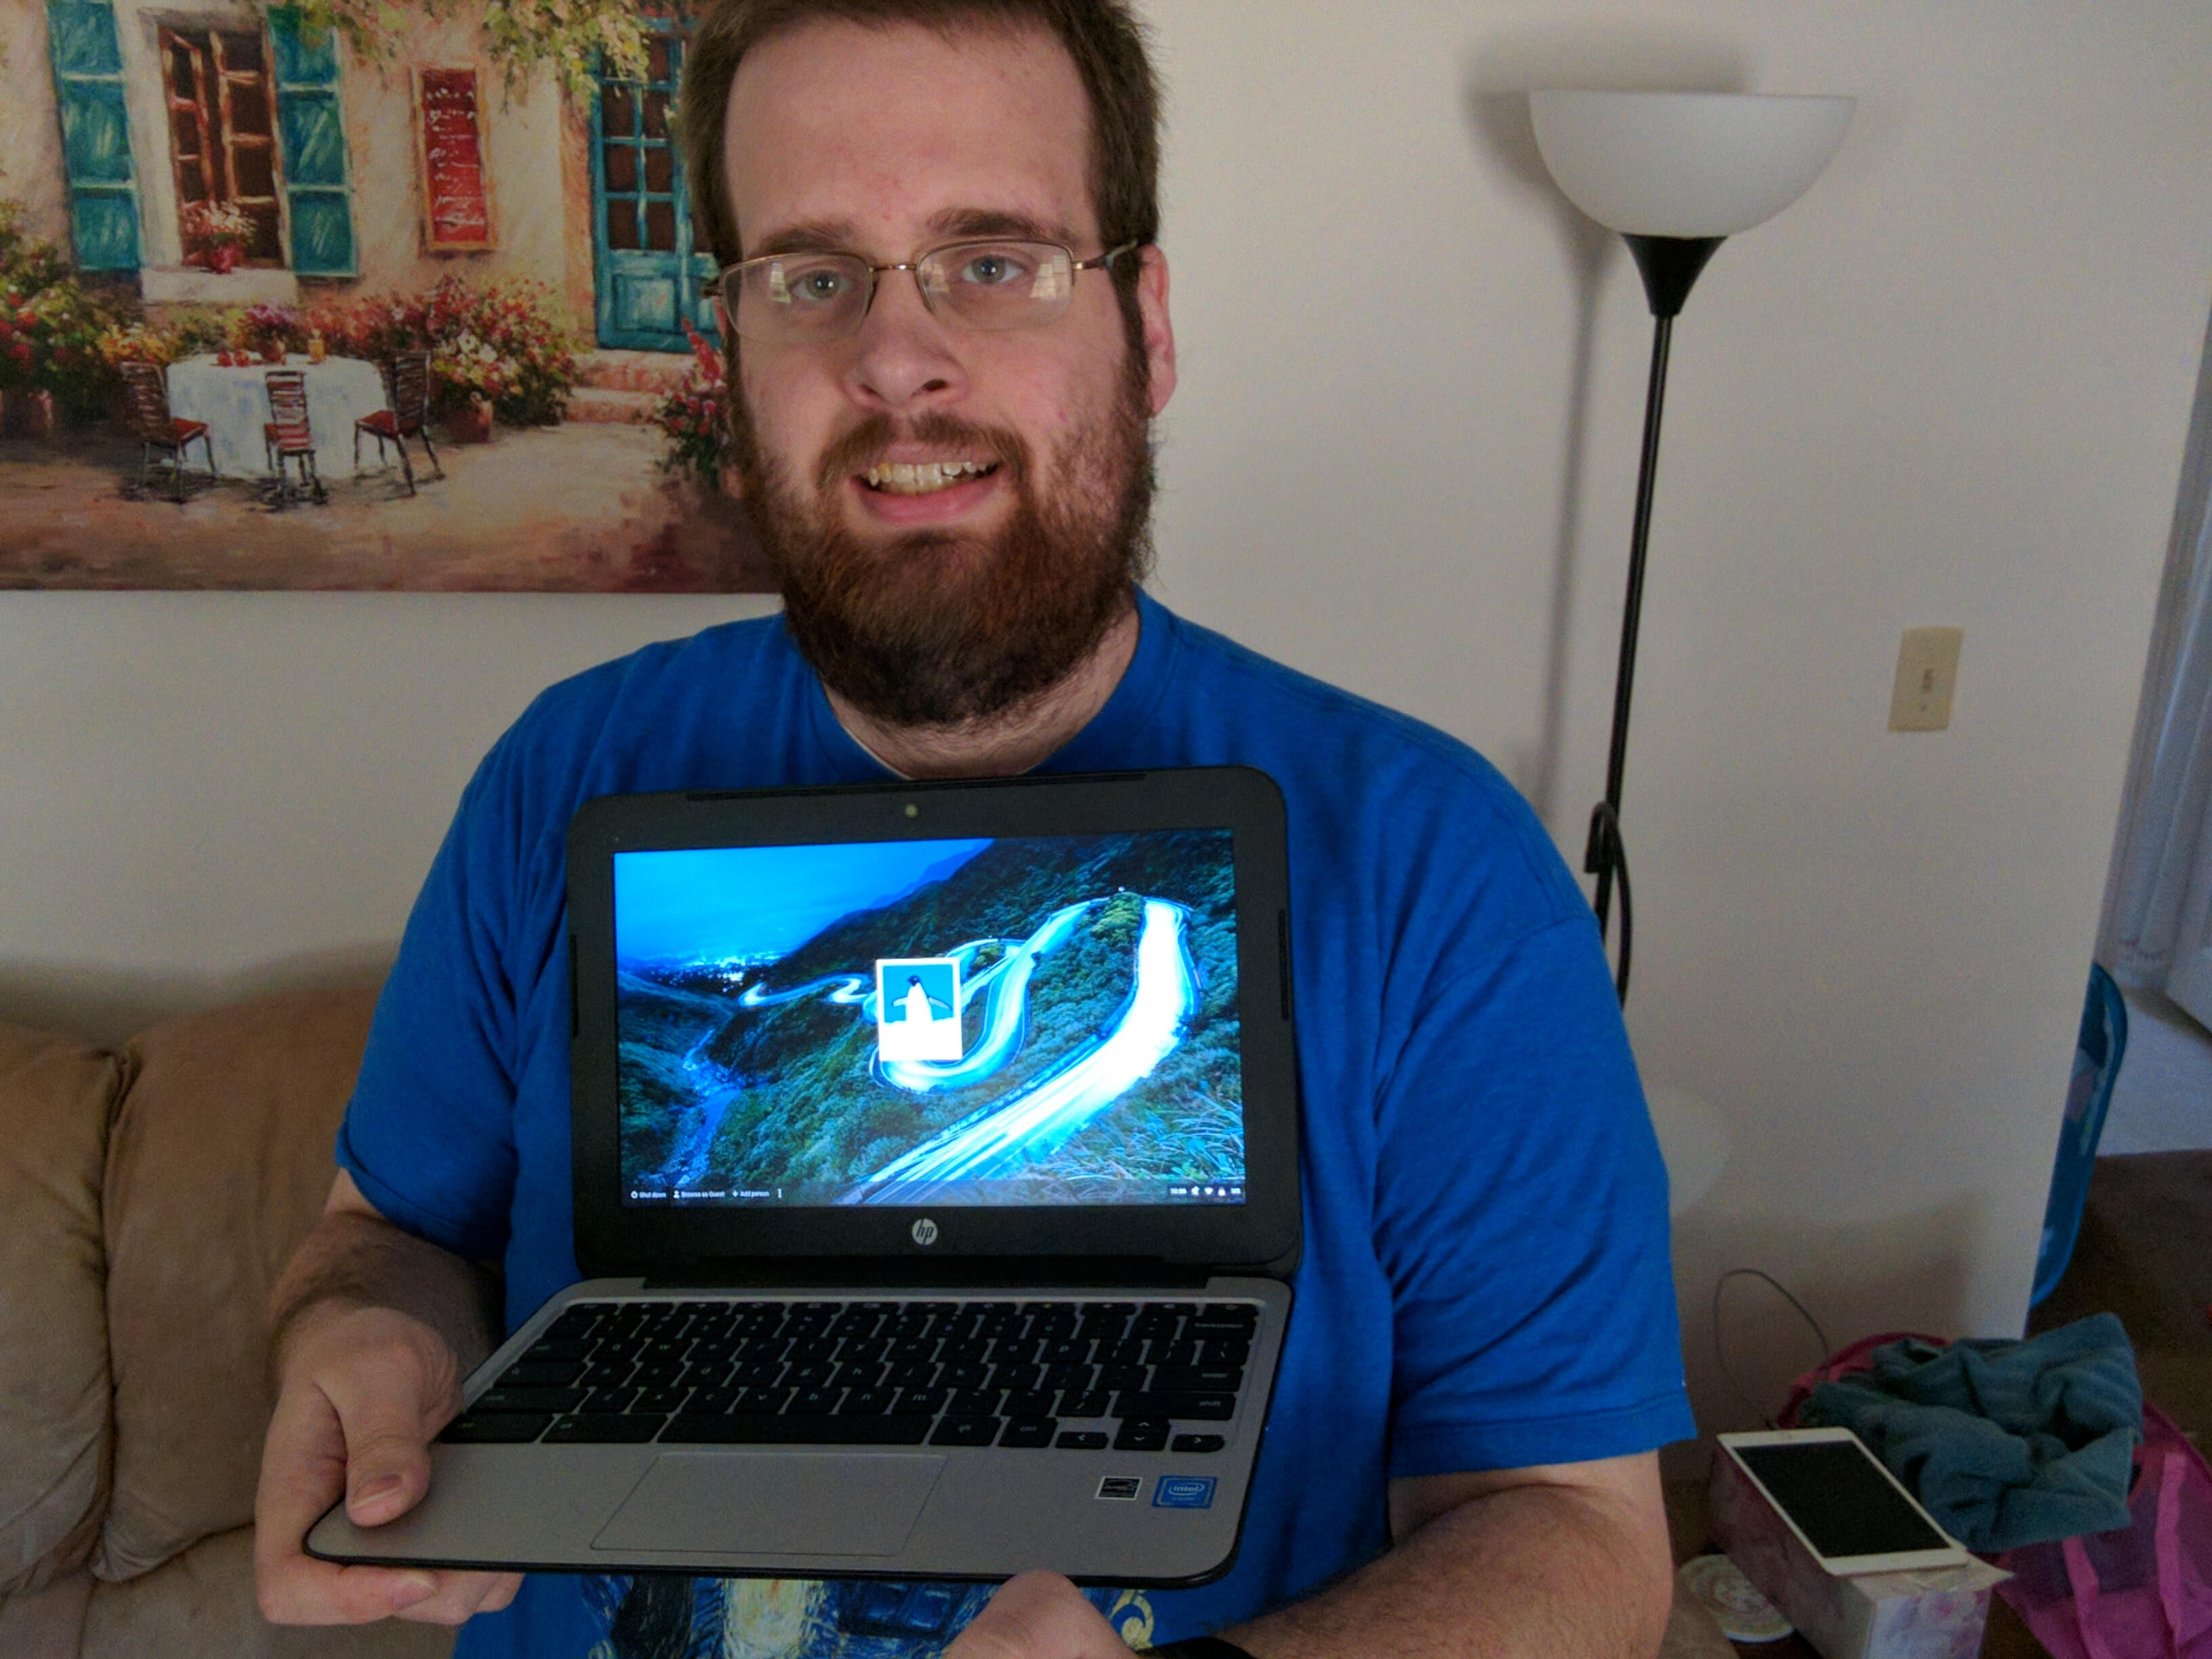 Google Chromebook By Haier #6 Giveaway